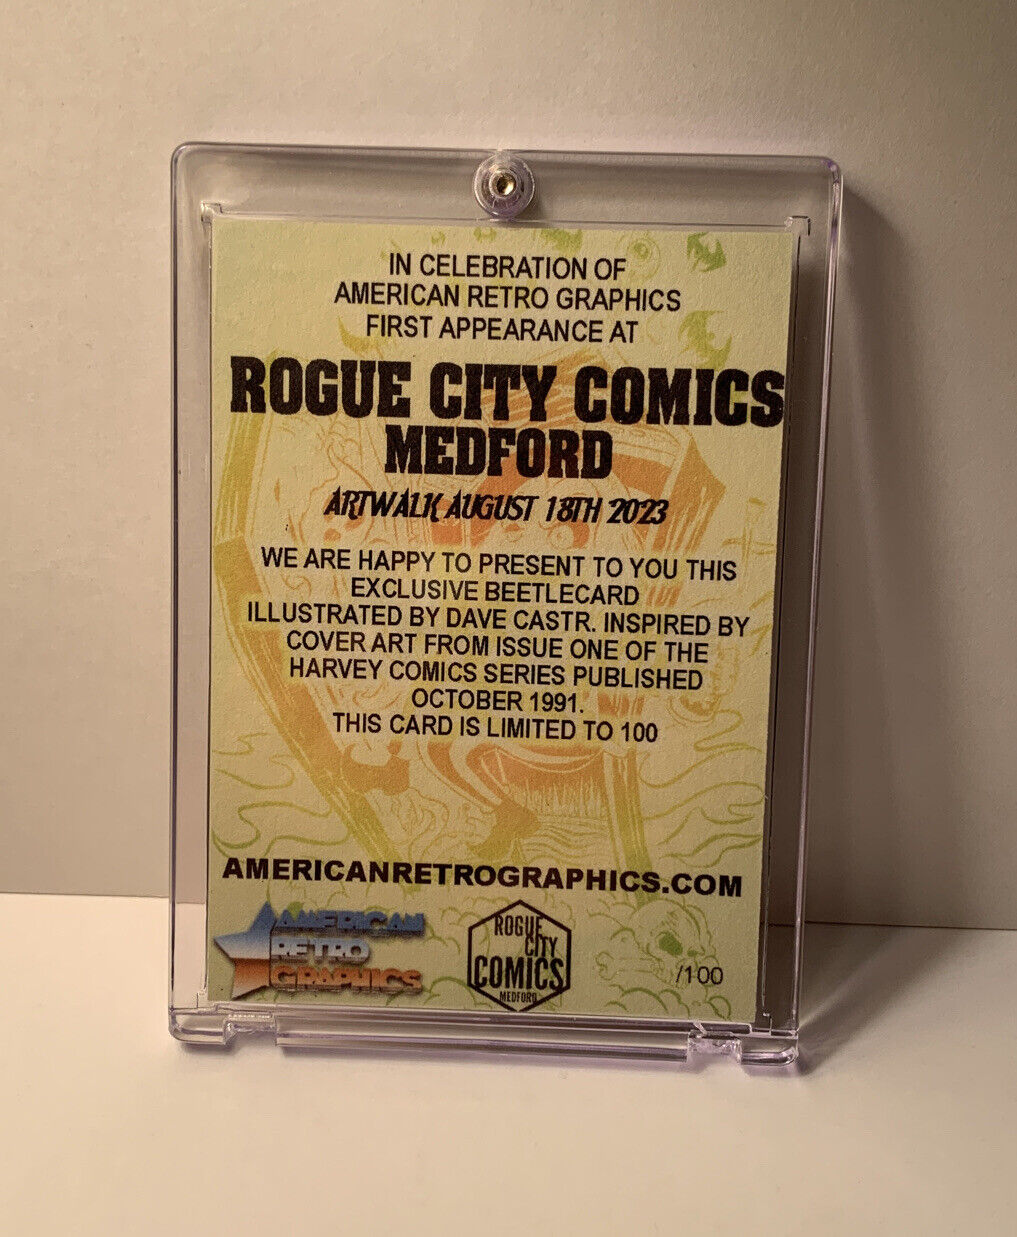 Beetlejuice Card ARG Rogue City Comics Medford Exclusive Trading Card Signed #